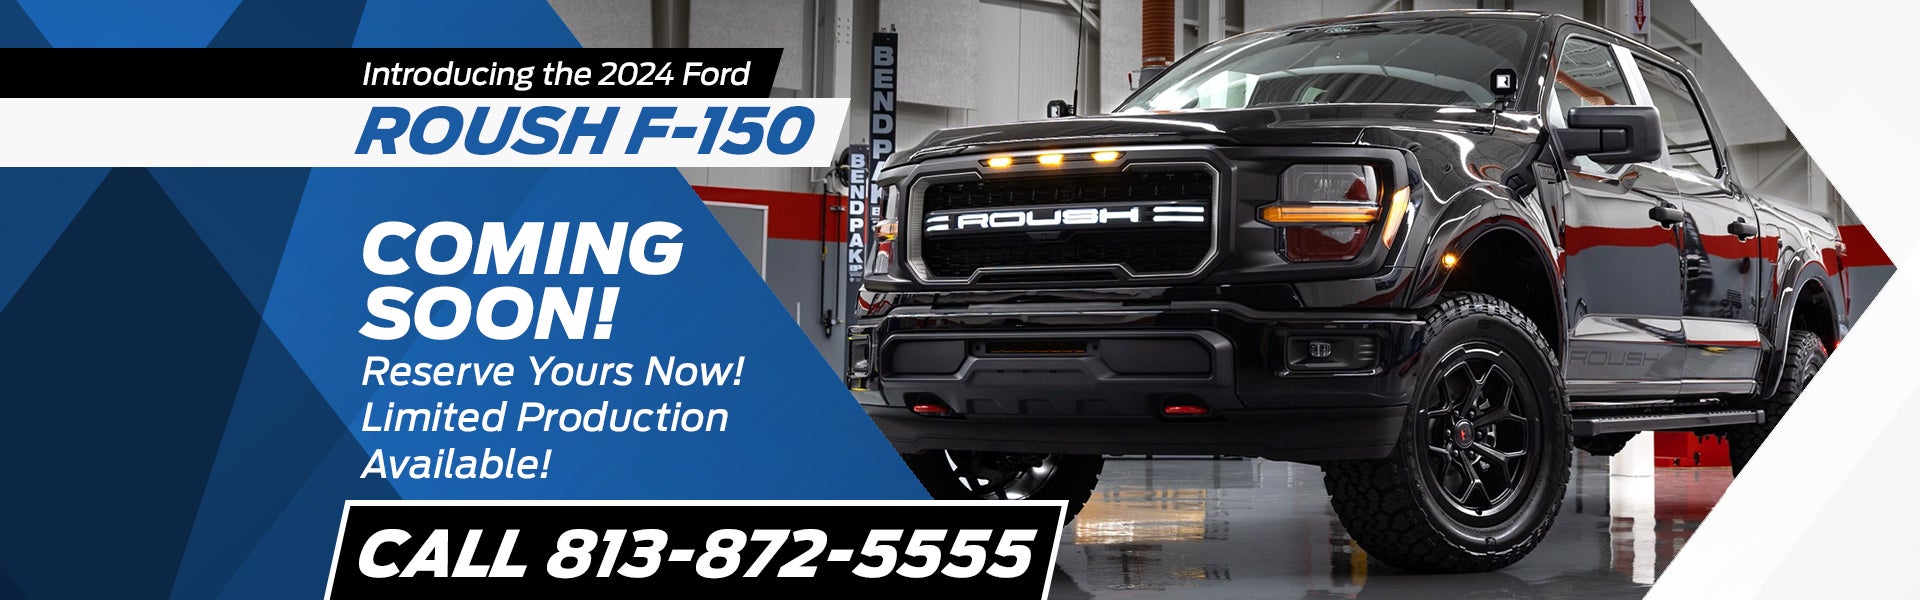 2024 Ford Roush F-150 Coming Soon!